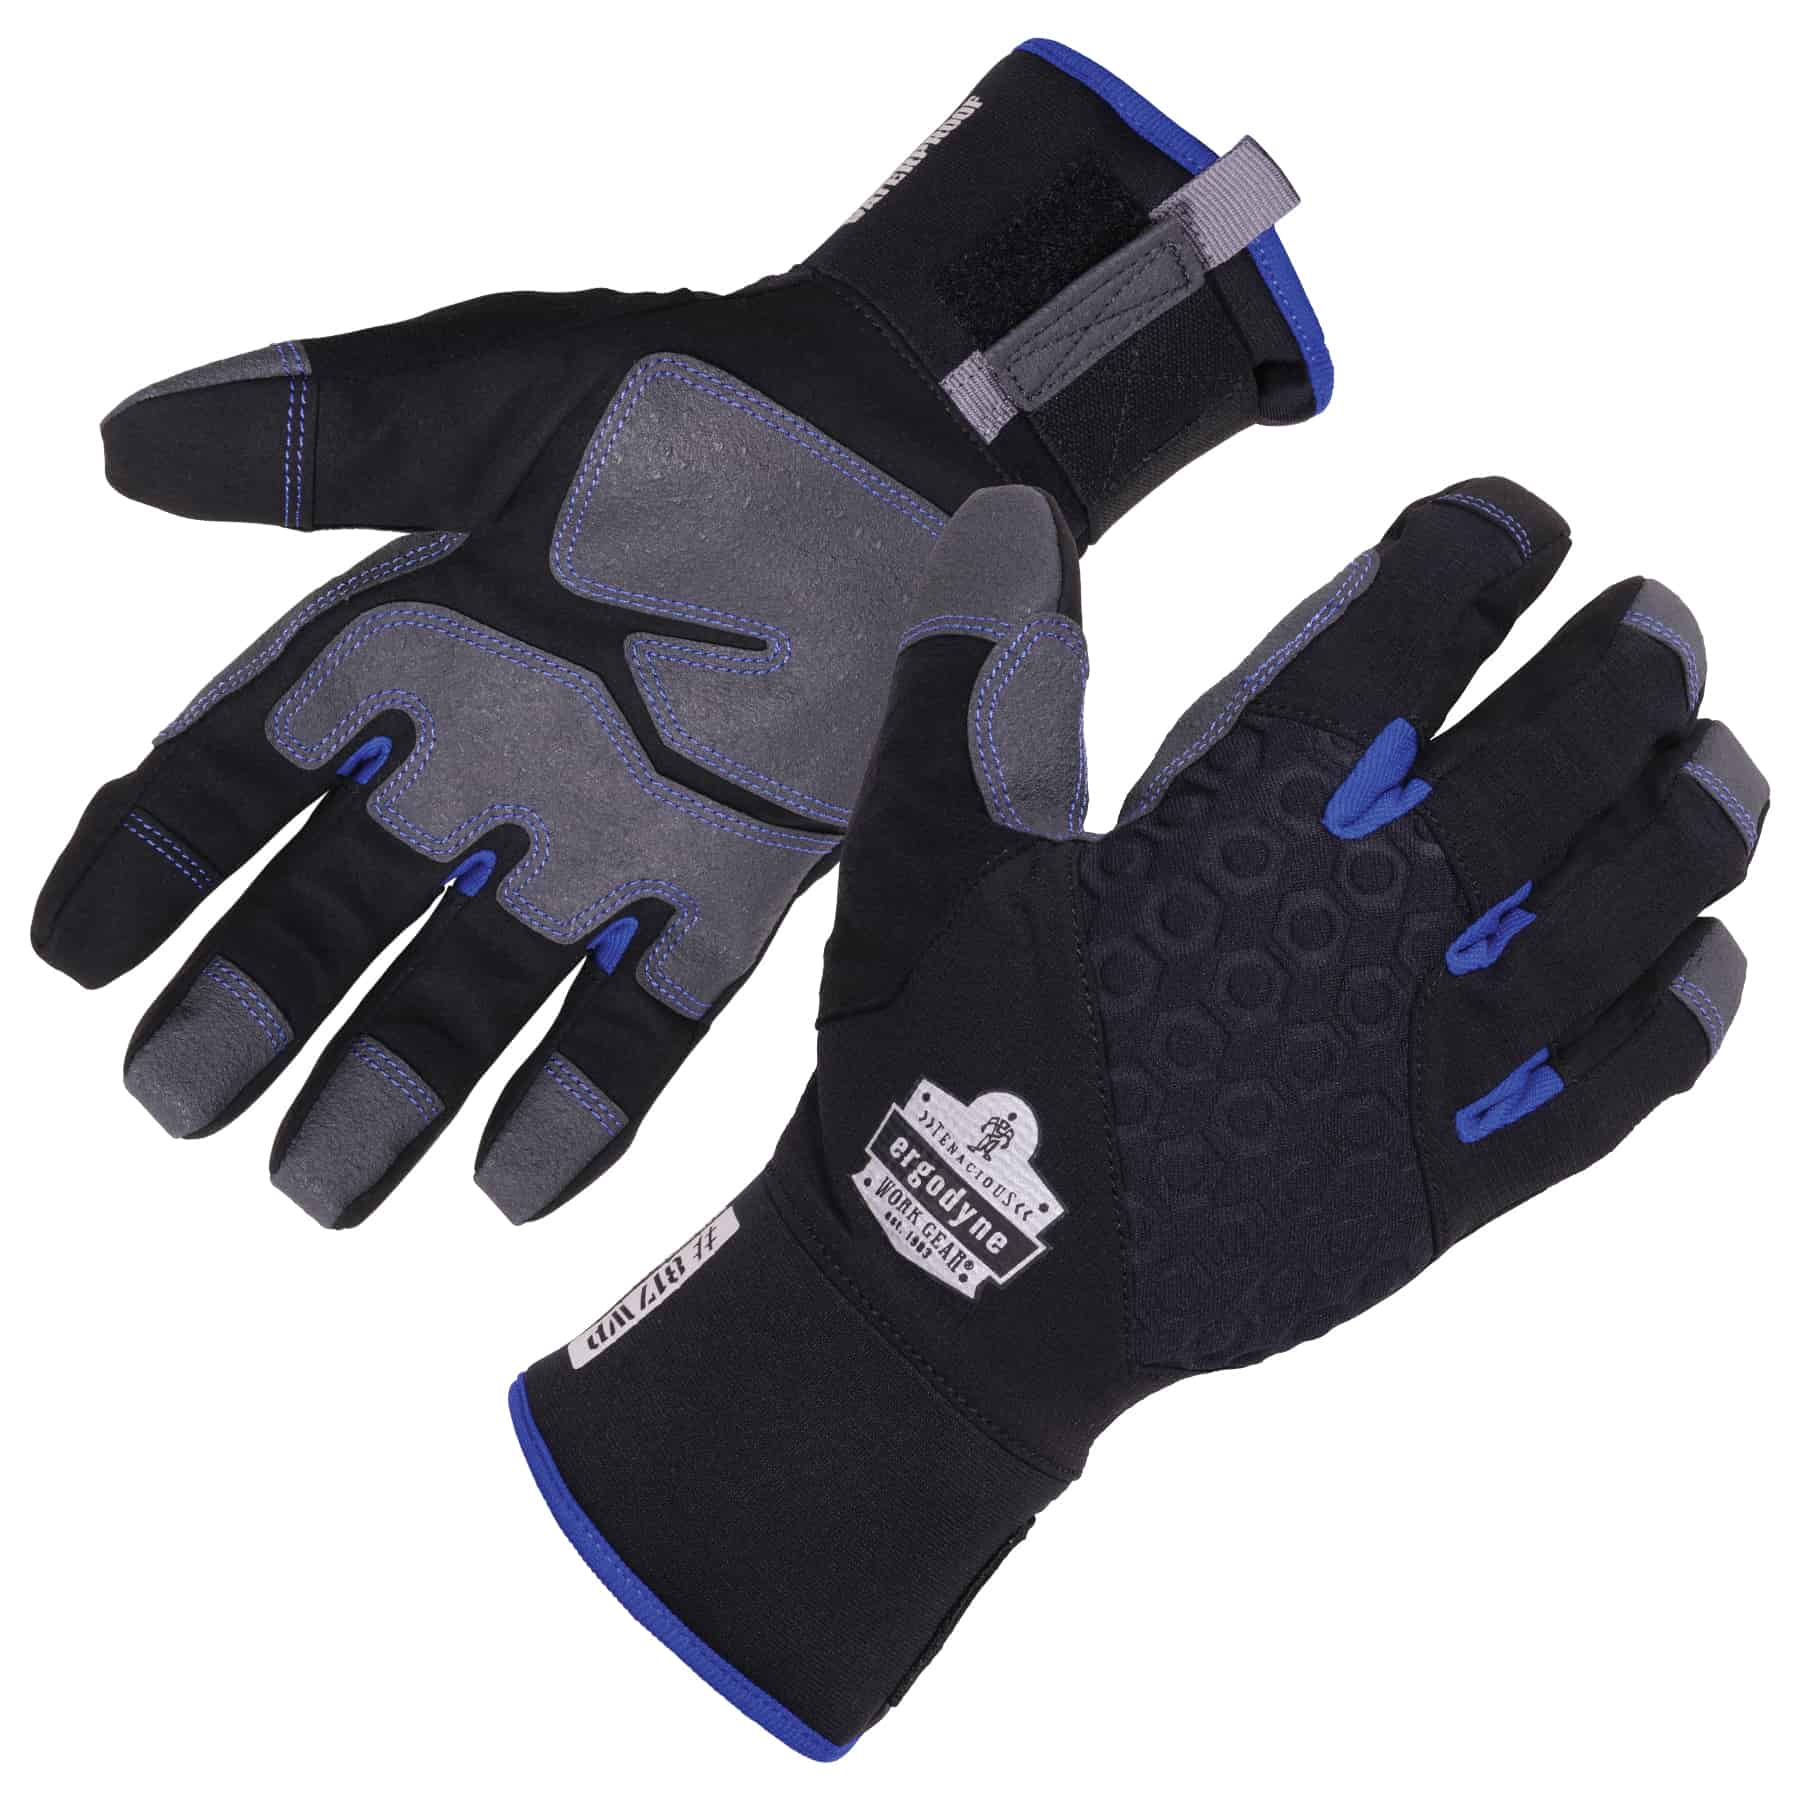 Unisex Winter Insulated Glove Warm Outdoor Thermal